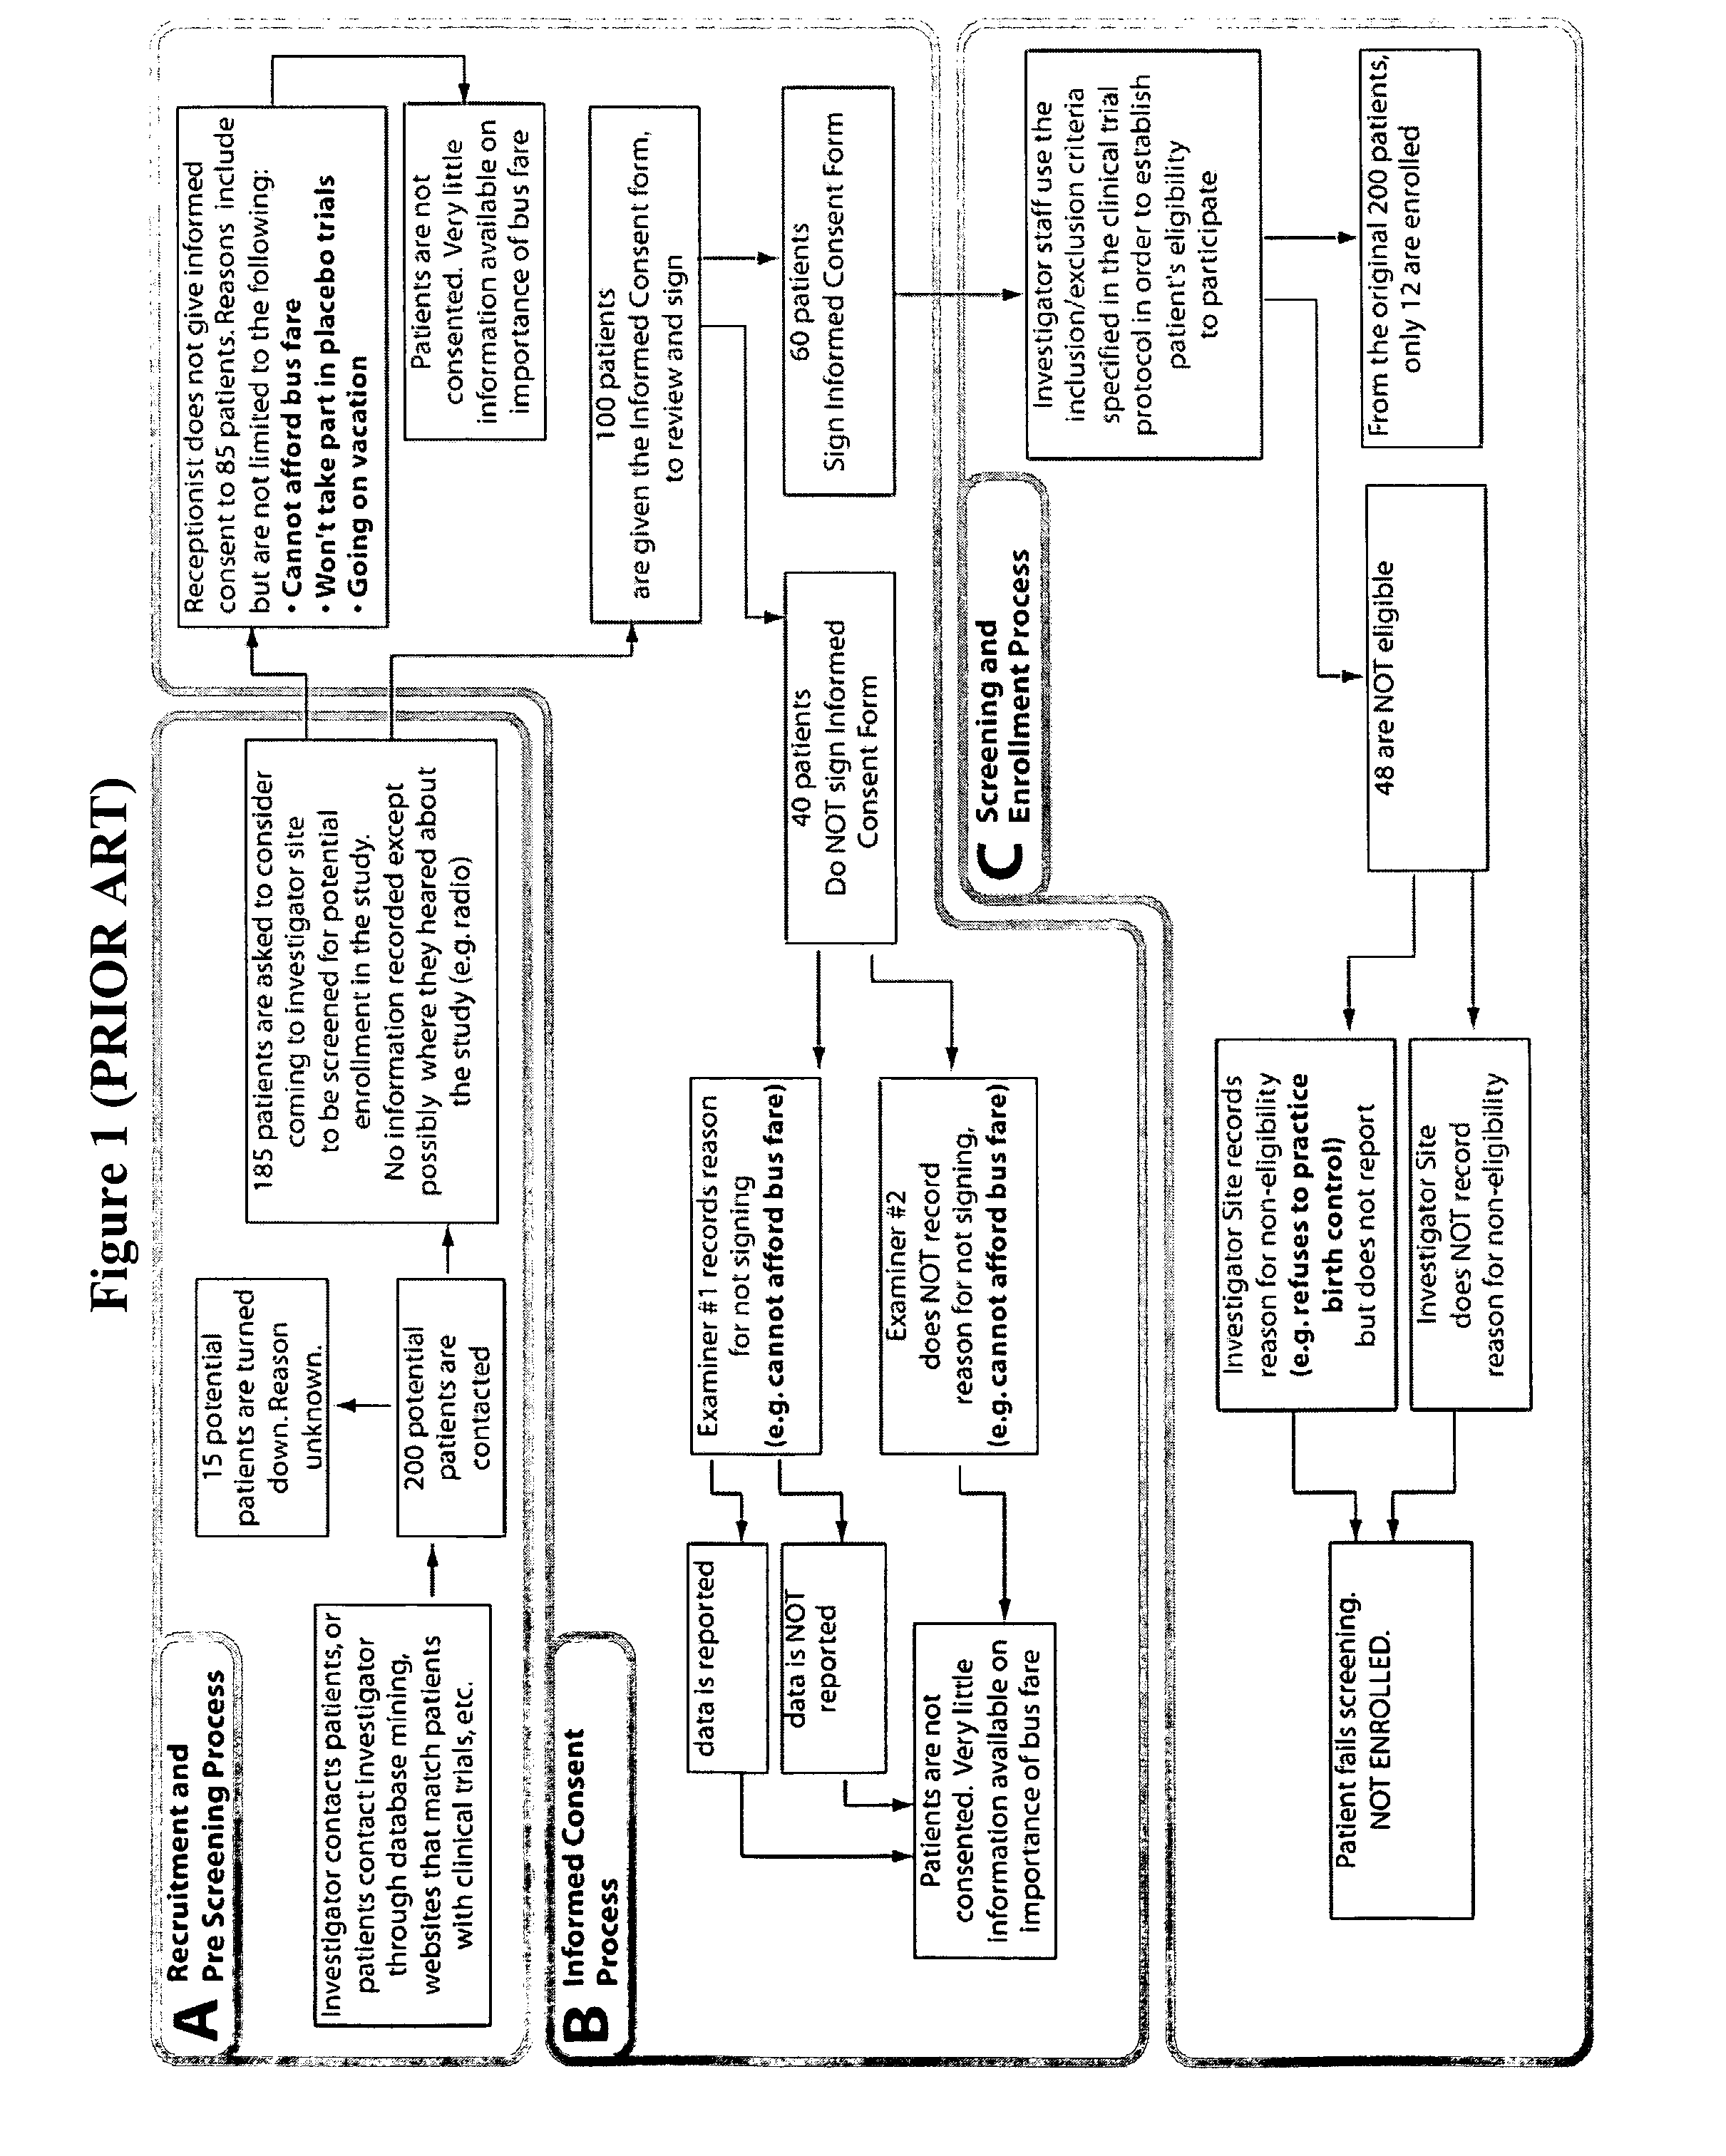 Method and apparatus for screening, enrollment and management of patients in clinical trials